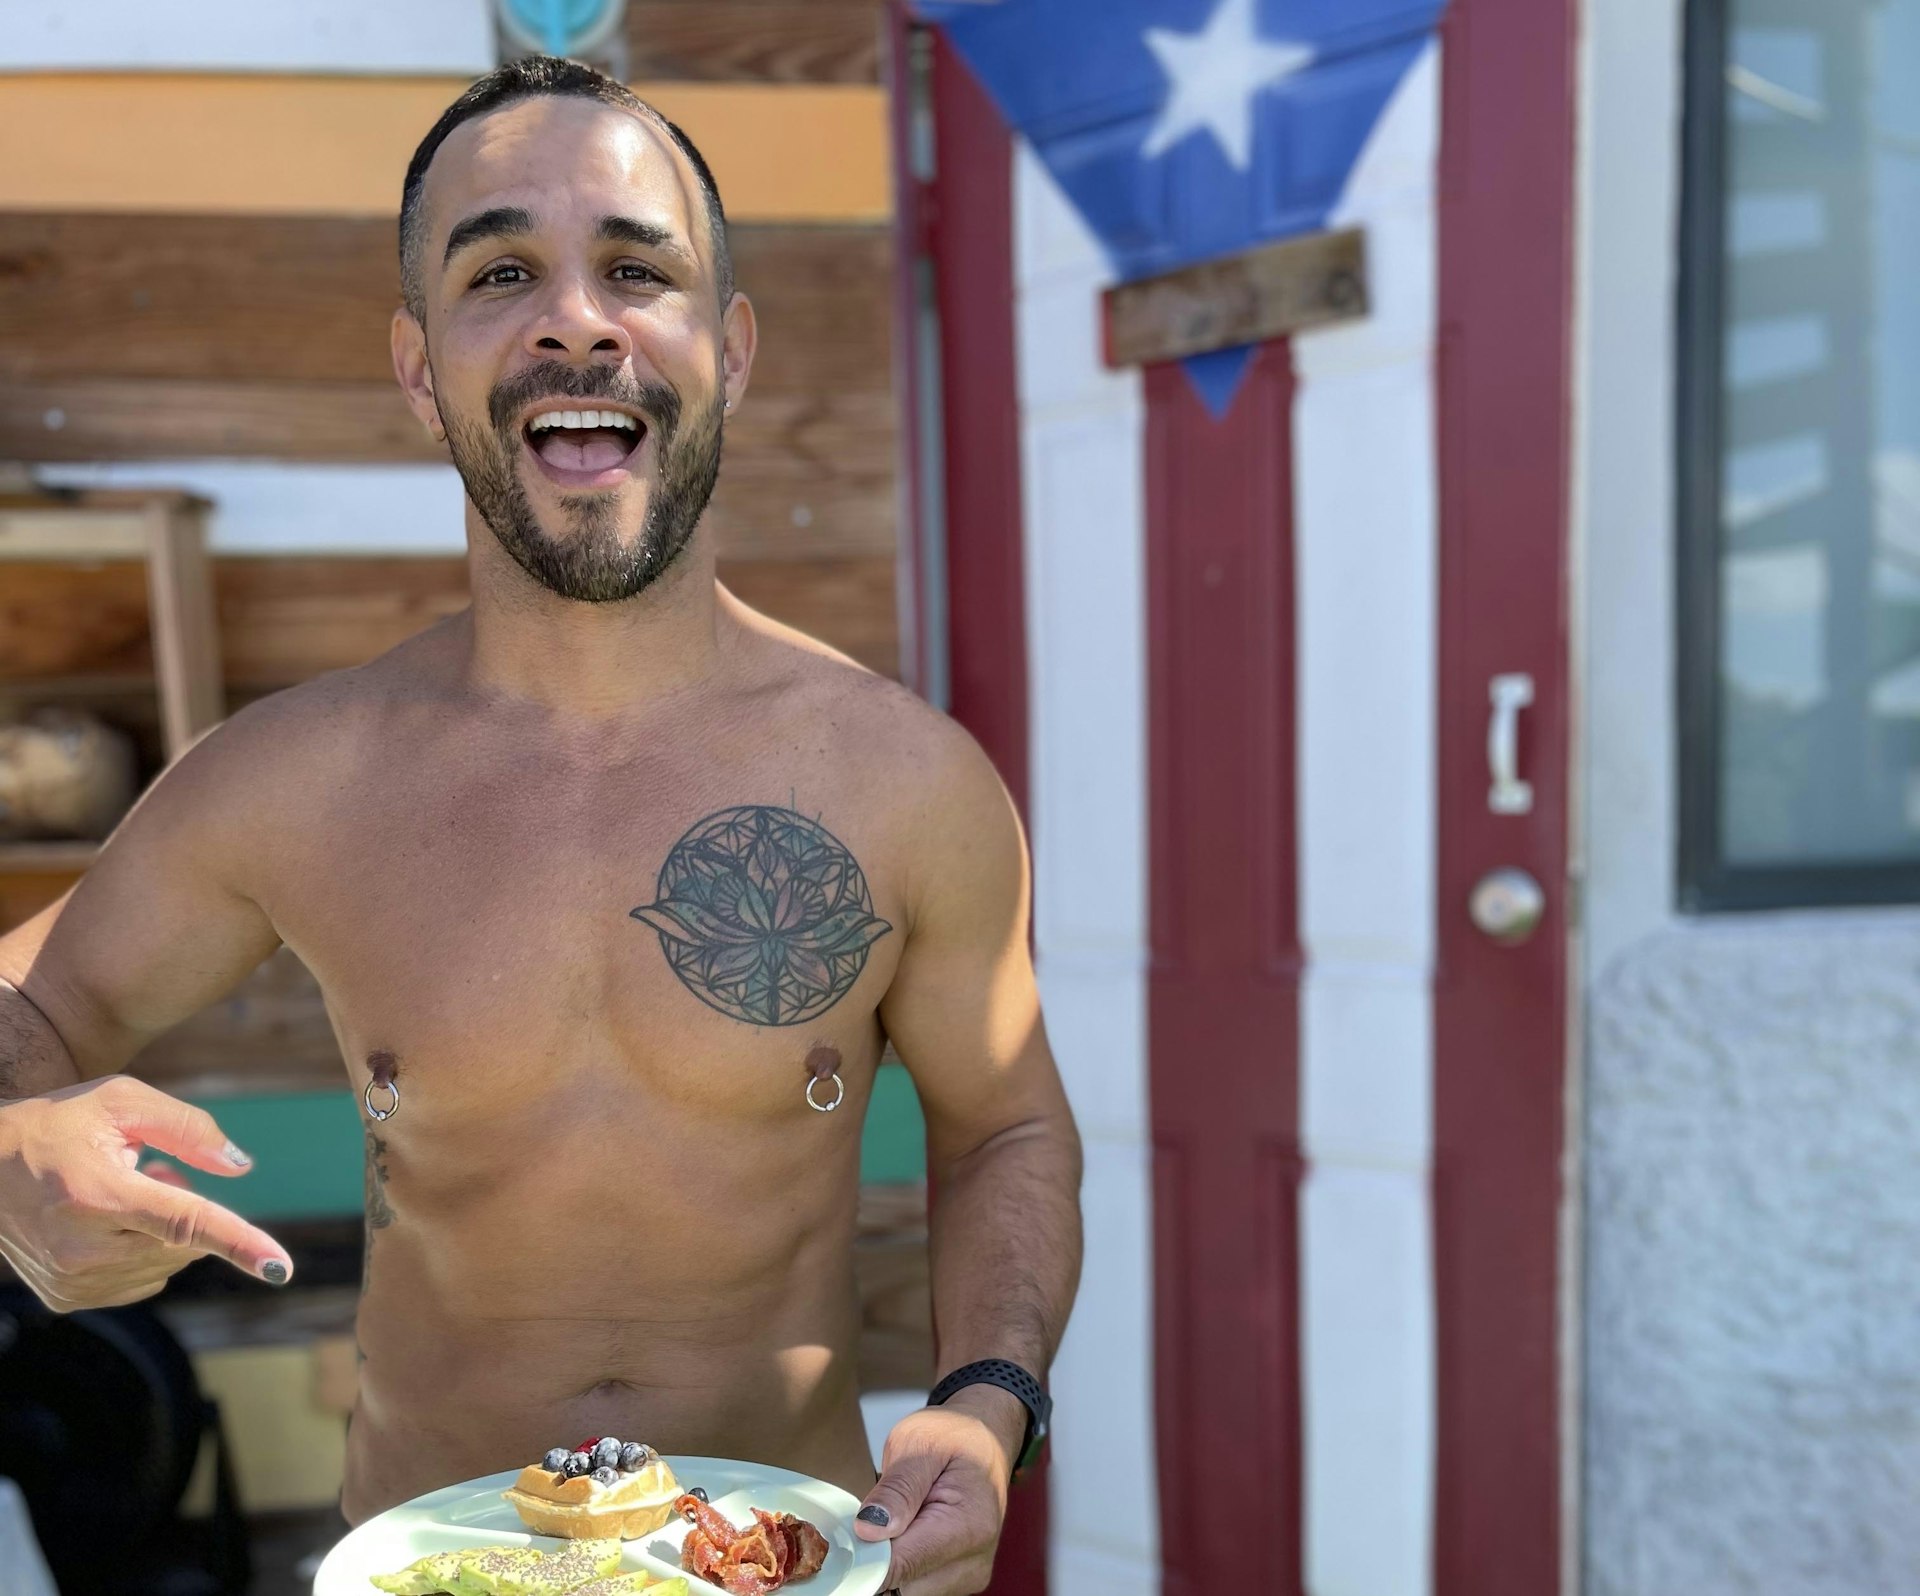 A man points to a plate of food while standing in front of a wooden door painted in the Puerto Rican flag.